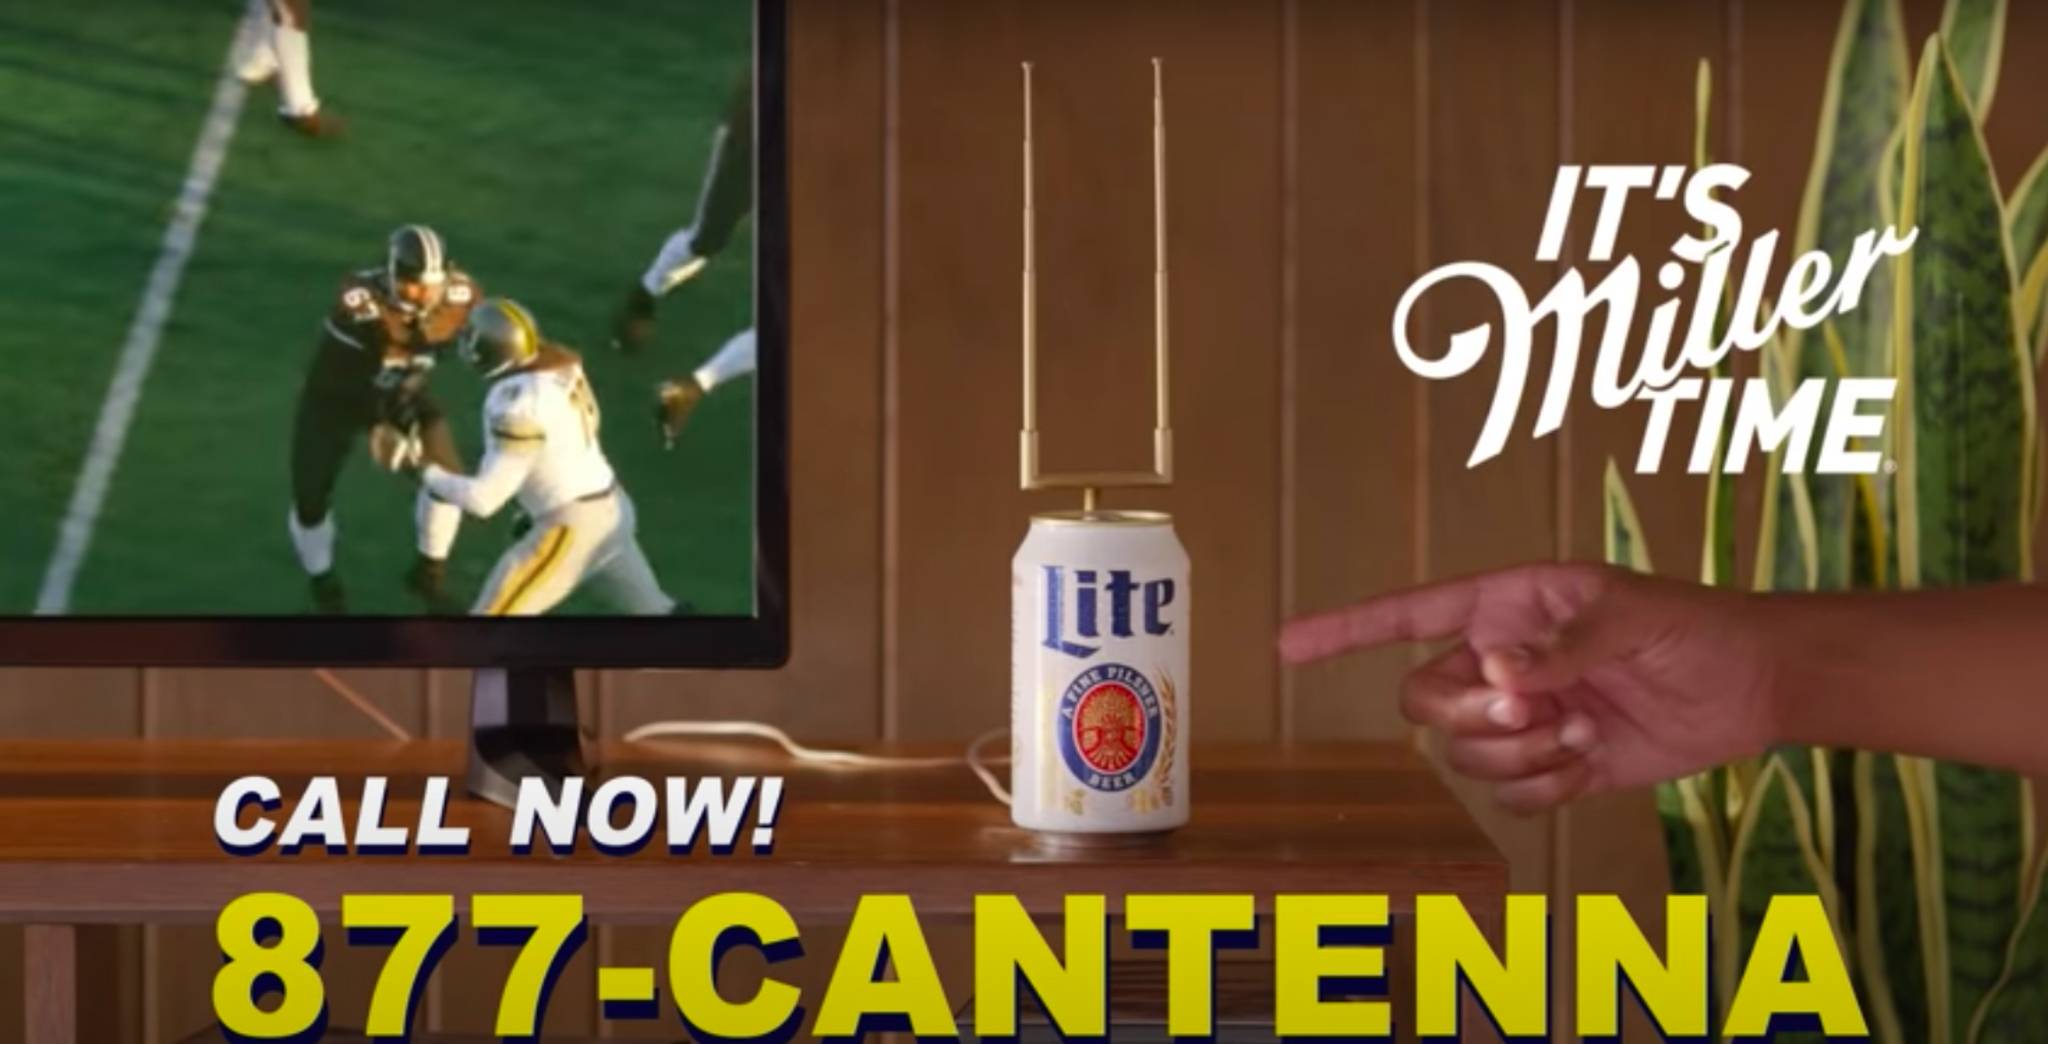 Beer 'cantenna’ streams football for cord-cutters